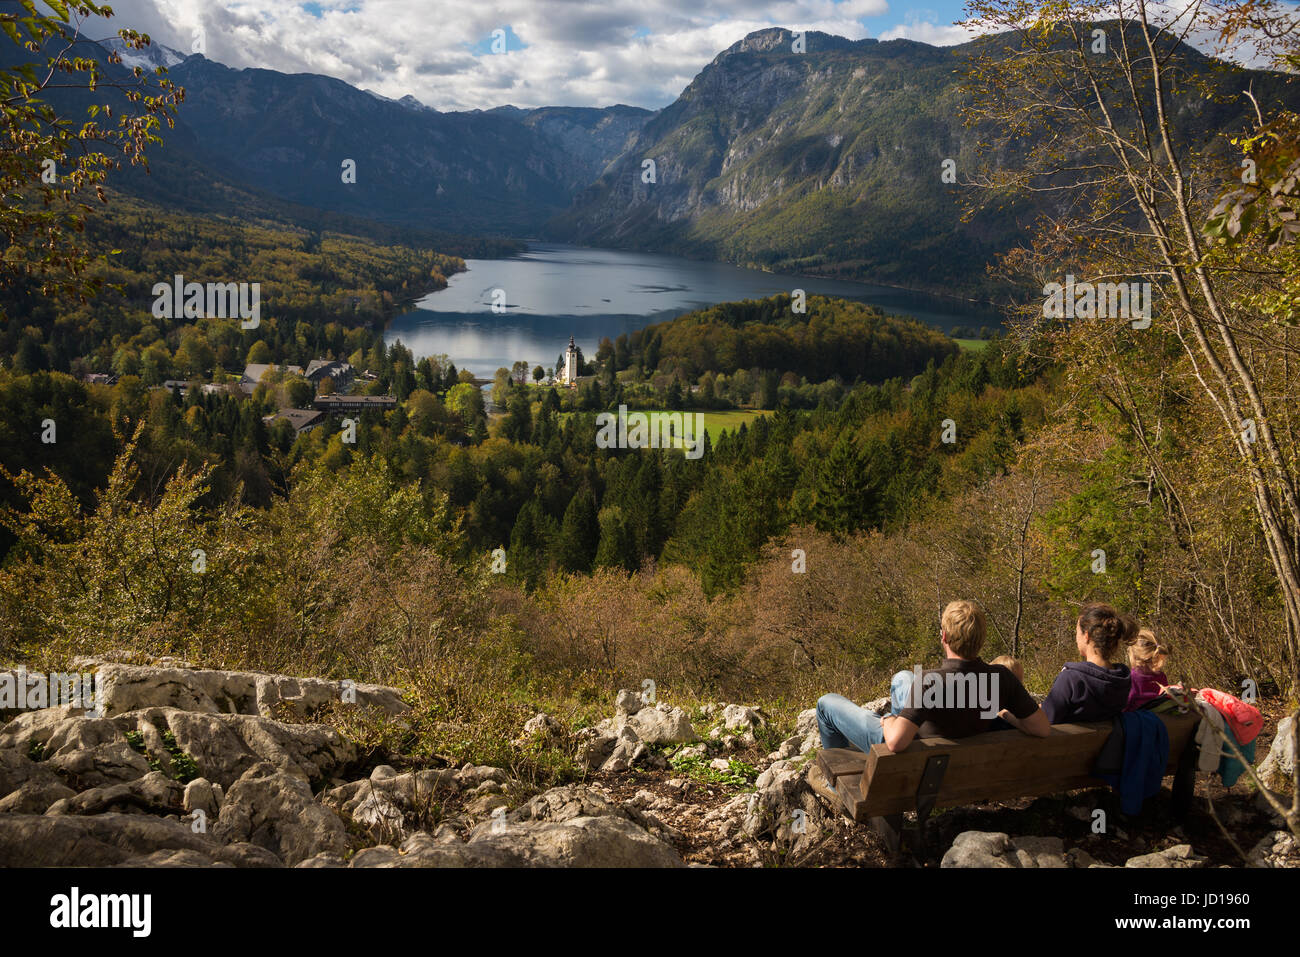 Family with small children resting on a bench admiring the view over a landscape with Lake Bohinj and mountains during a hike in autumn in Slovenia. Stock Photo